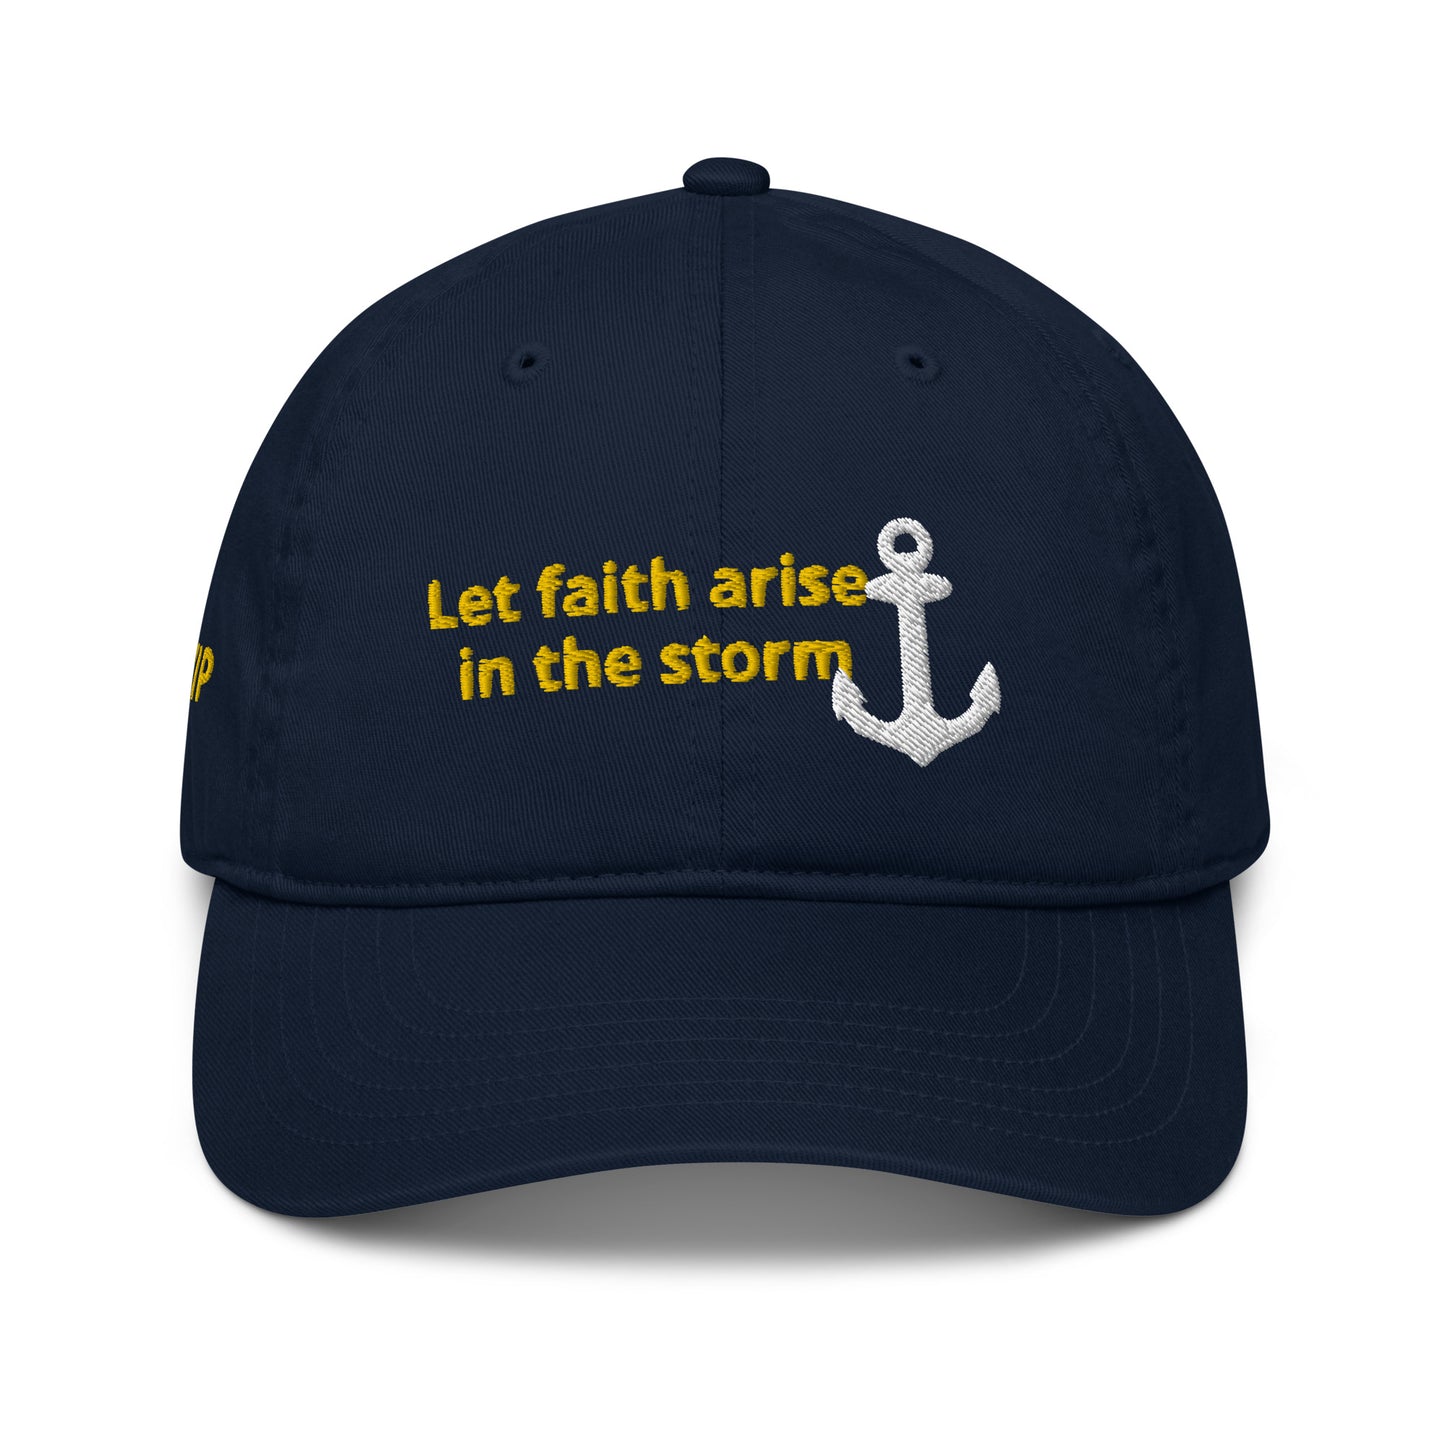 let faith arise in the storm